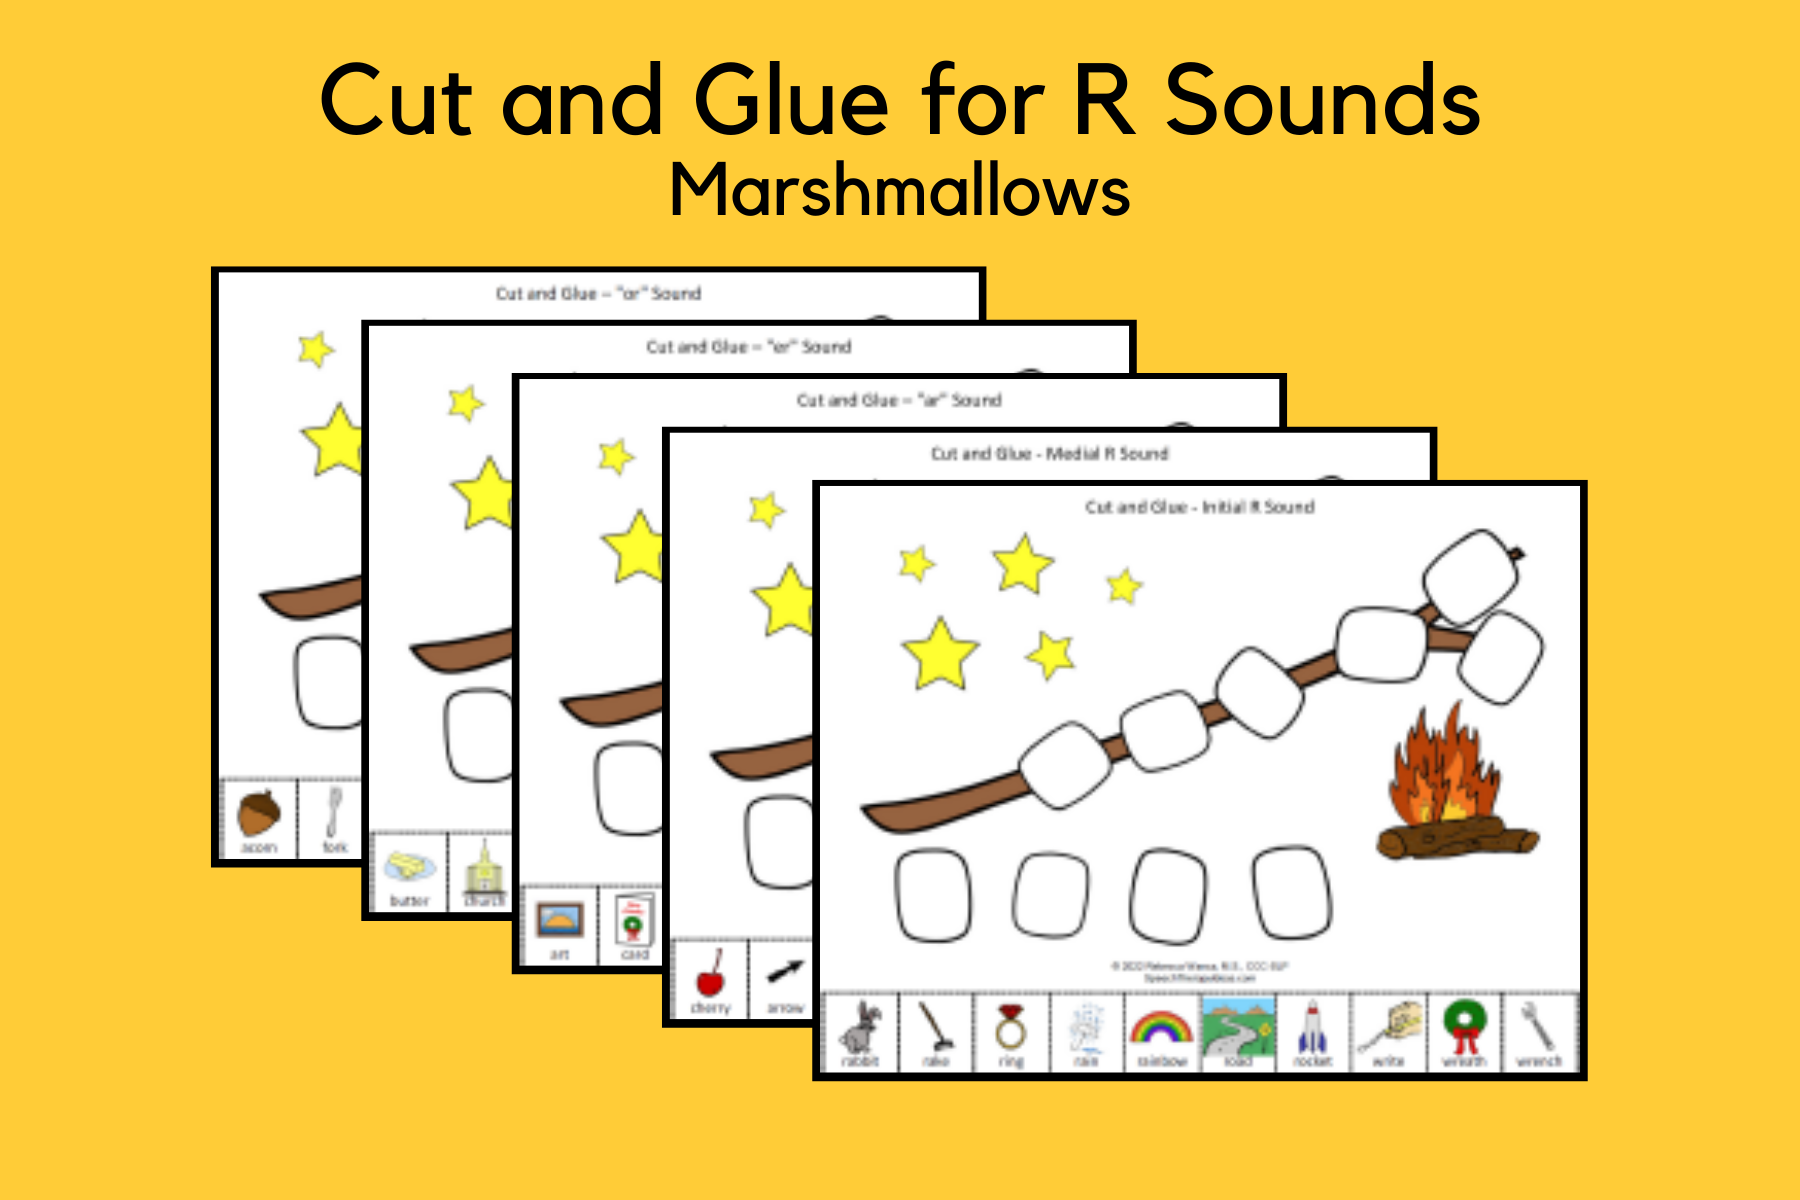 Cut and Glue for R Sounds – Marshmallows